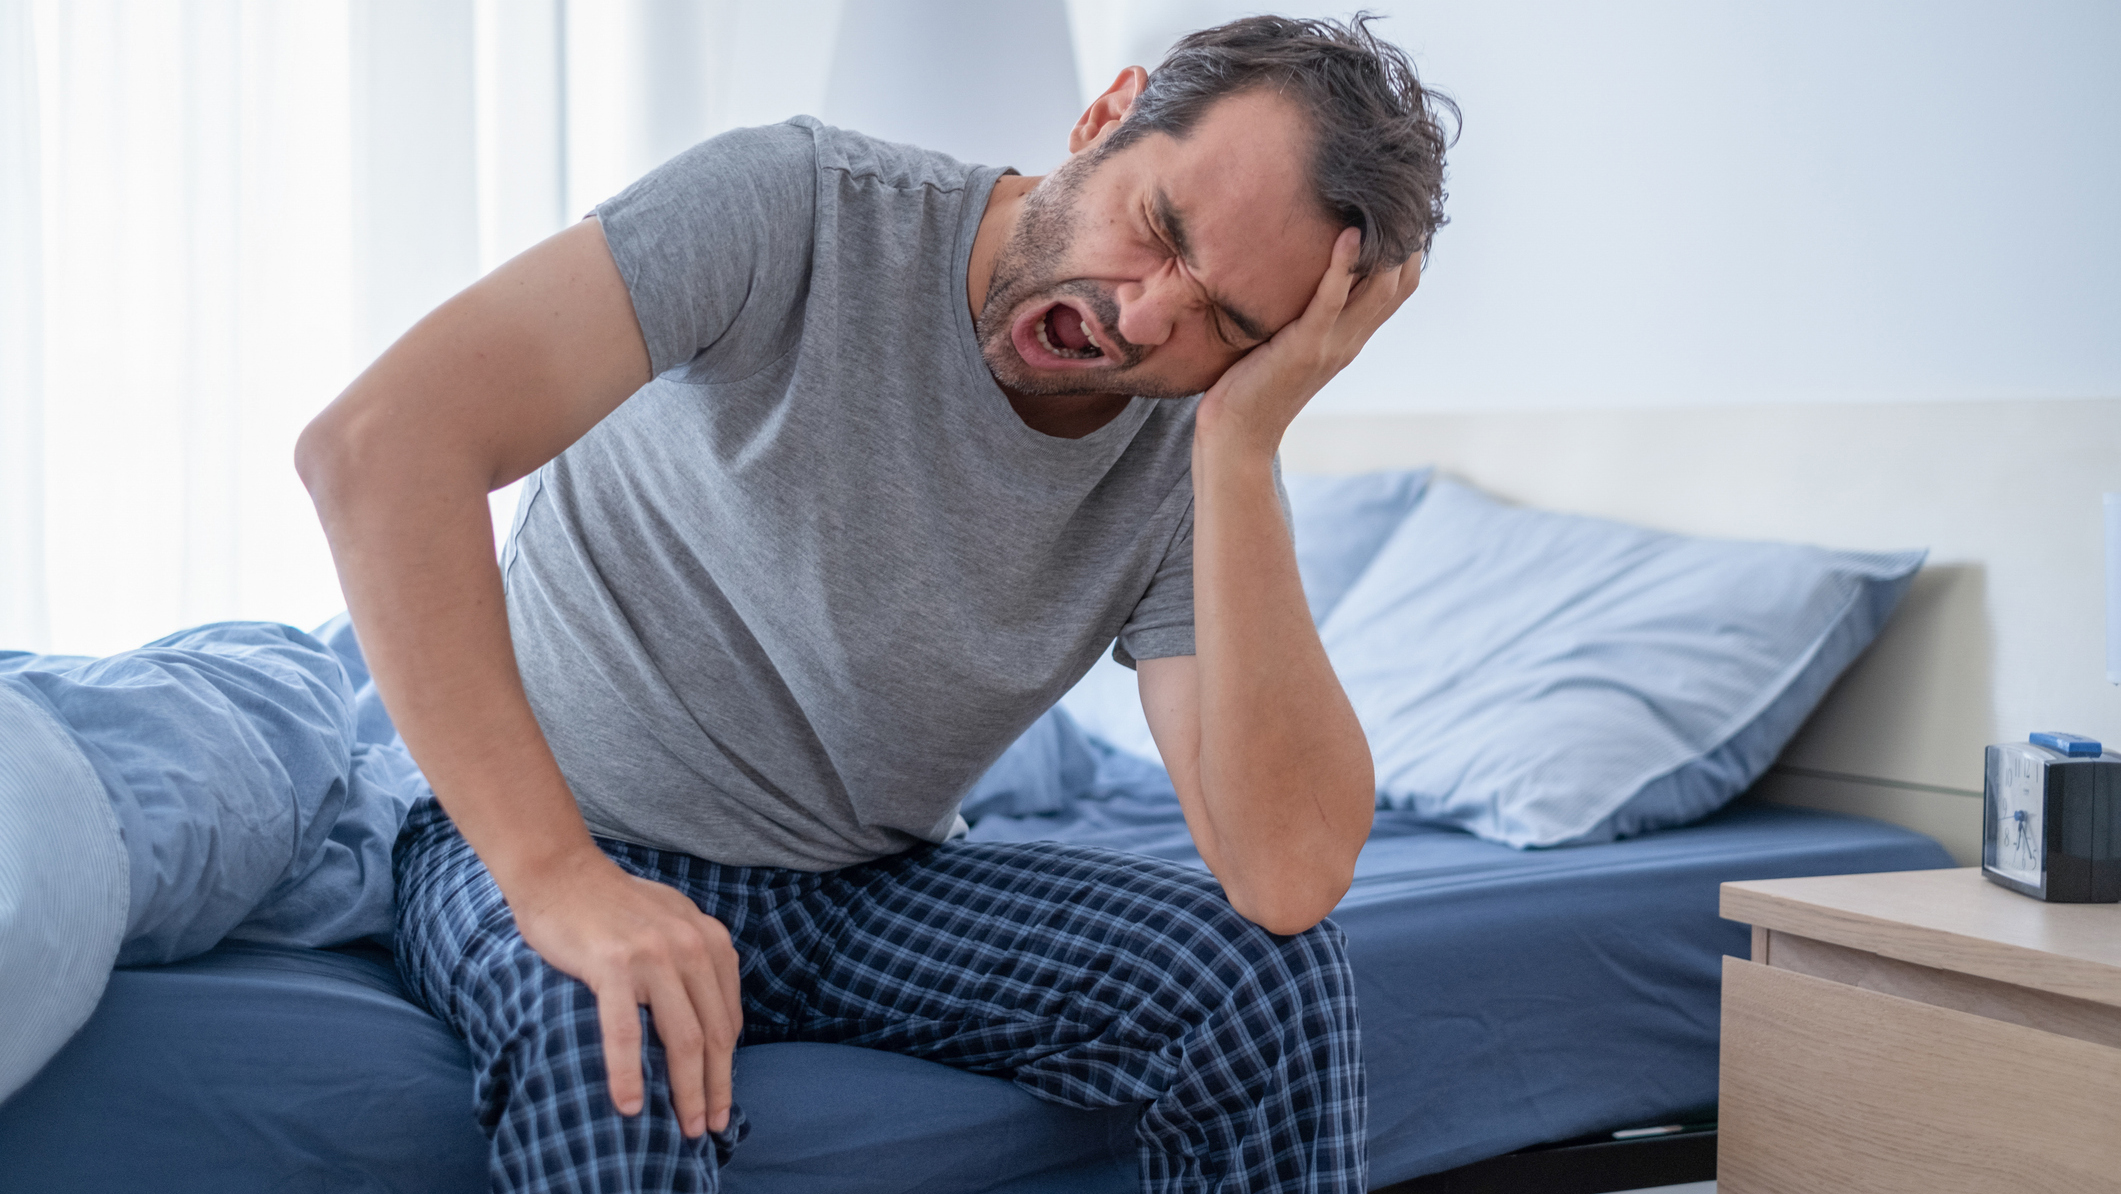 A man sits in bed at night because his restless legs keep him awake and affecting his sleep.